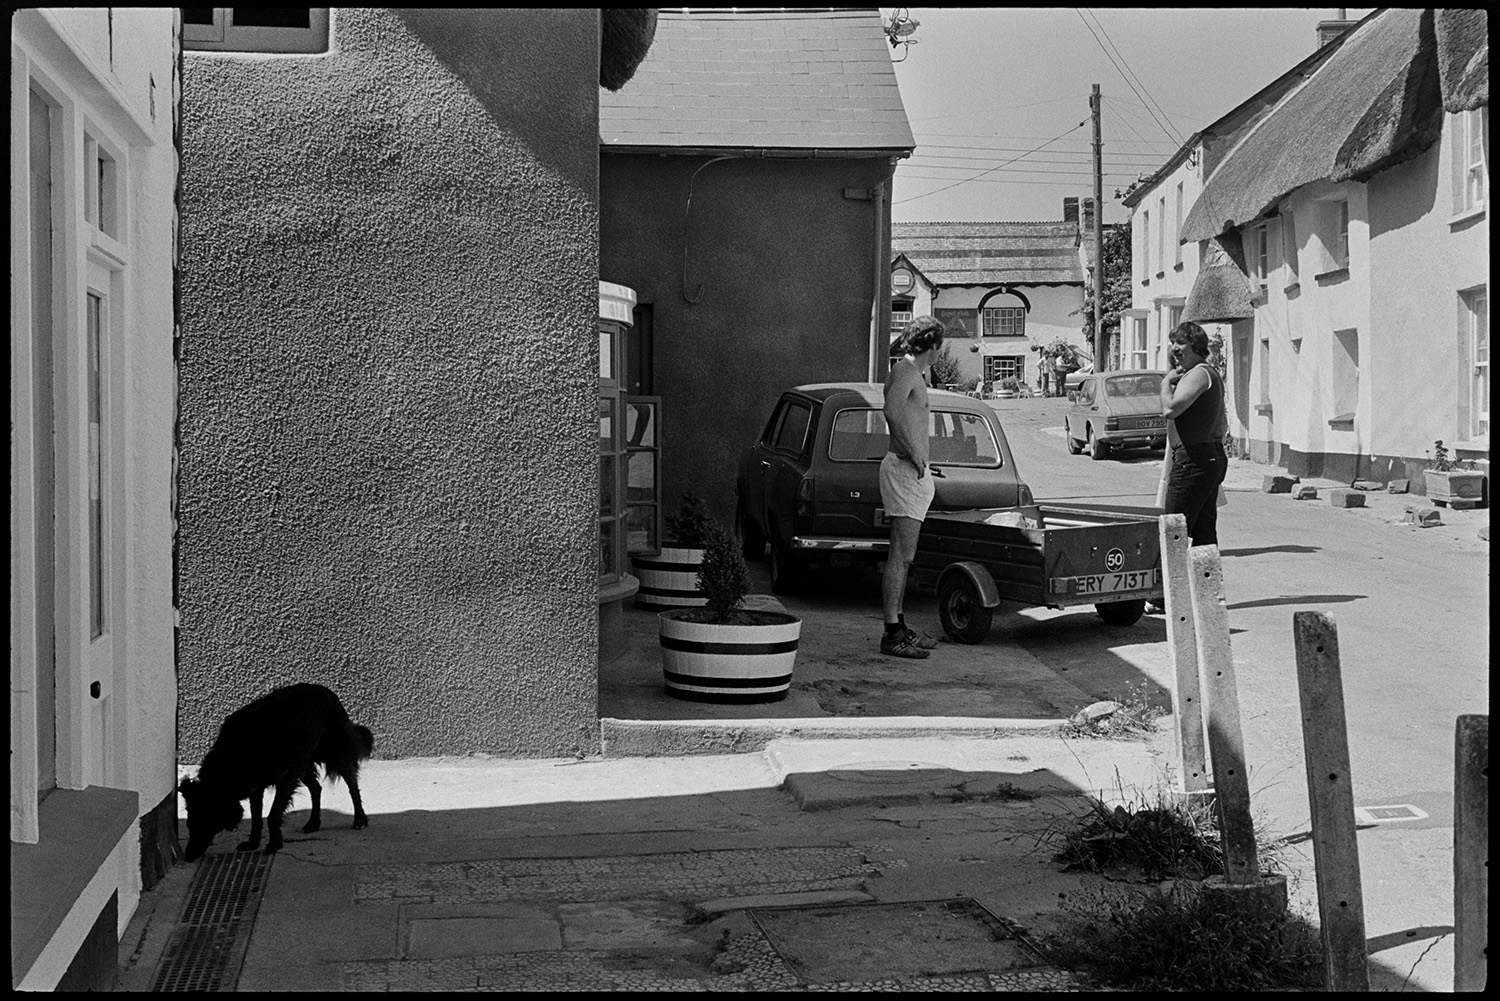 Street scenes, bicycles, people mending car.
[Two men talking by a car with a trailer parked in Fore Street, Dolton. A dog is in the foreground and thatched cottages and the Royal Oak pub are visible in the background.]